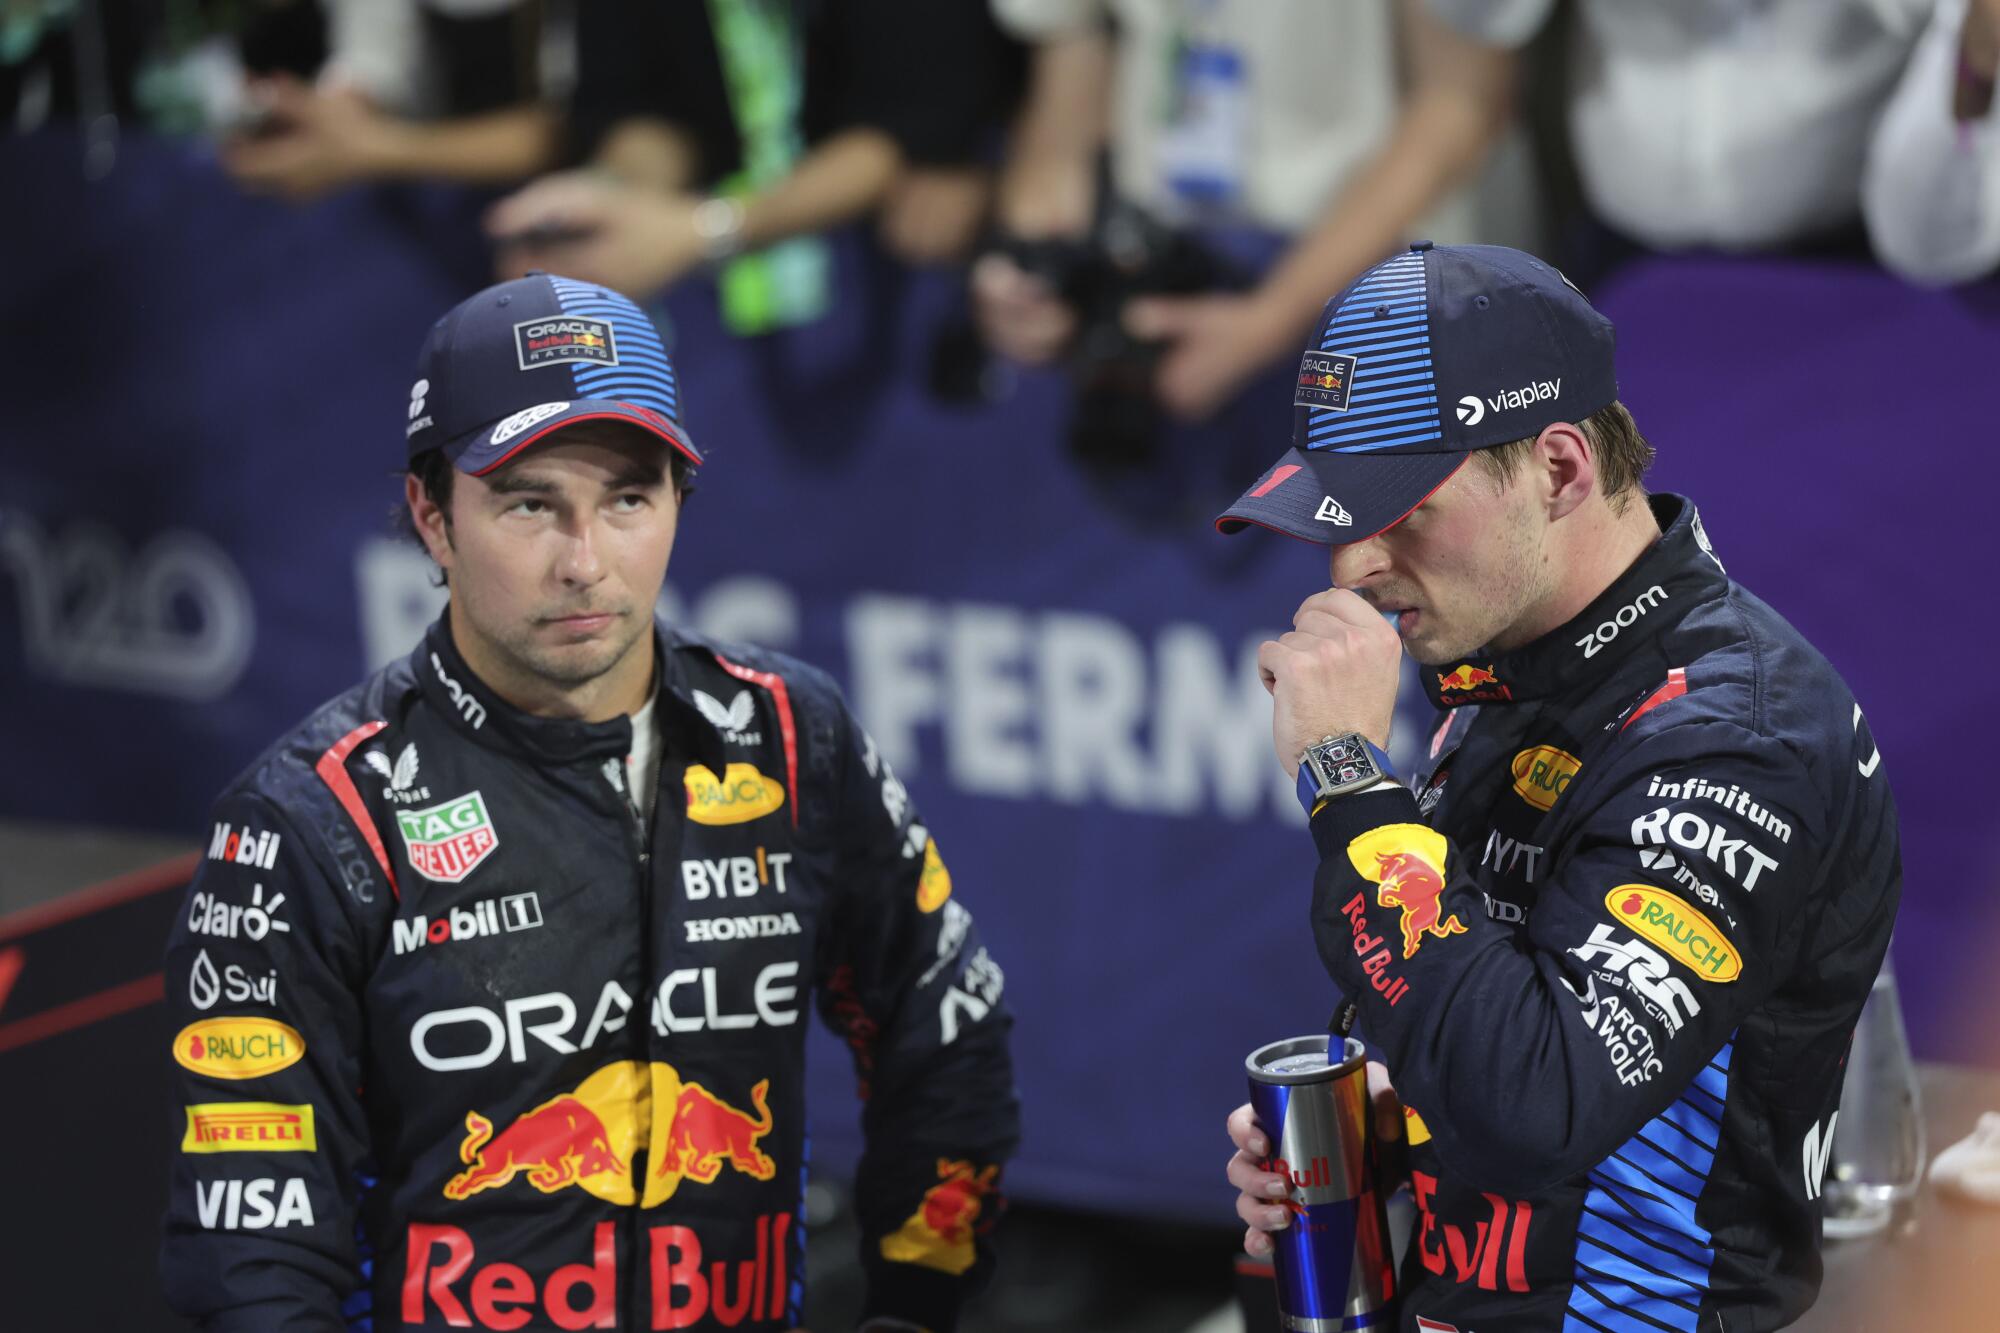 Two Formula One drivers wear racing suits with Oracle and Red Bull logos.